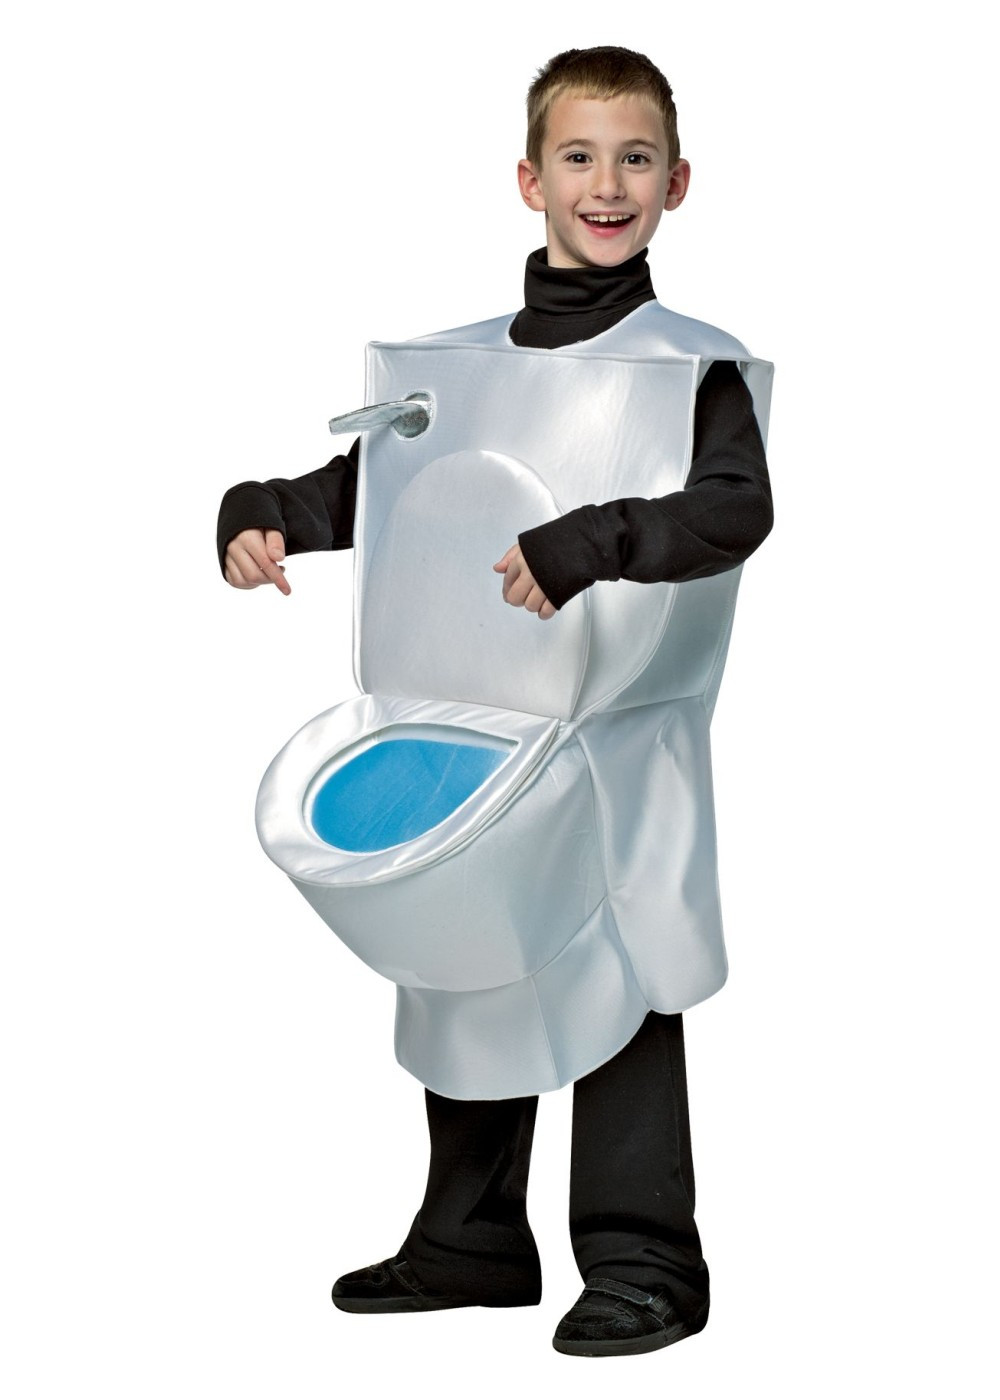 Toilet Halloween Costume
 Boys Toilet Costume Funny Costumes New for 2017